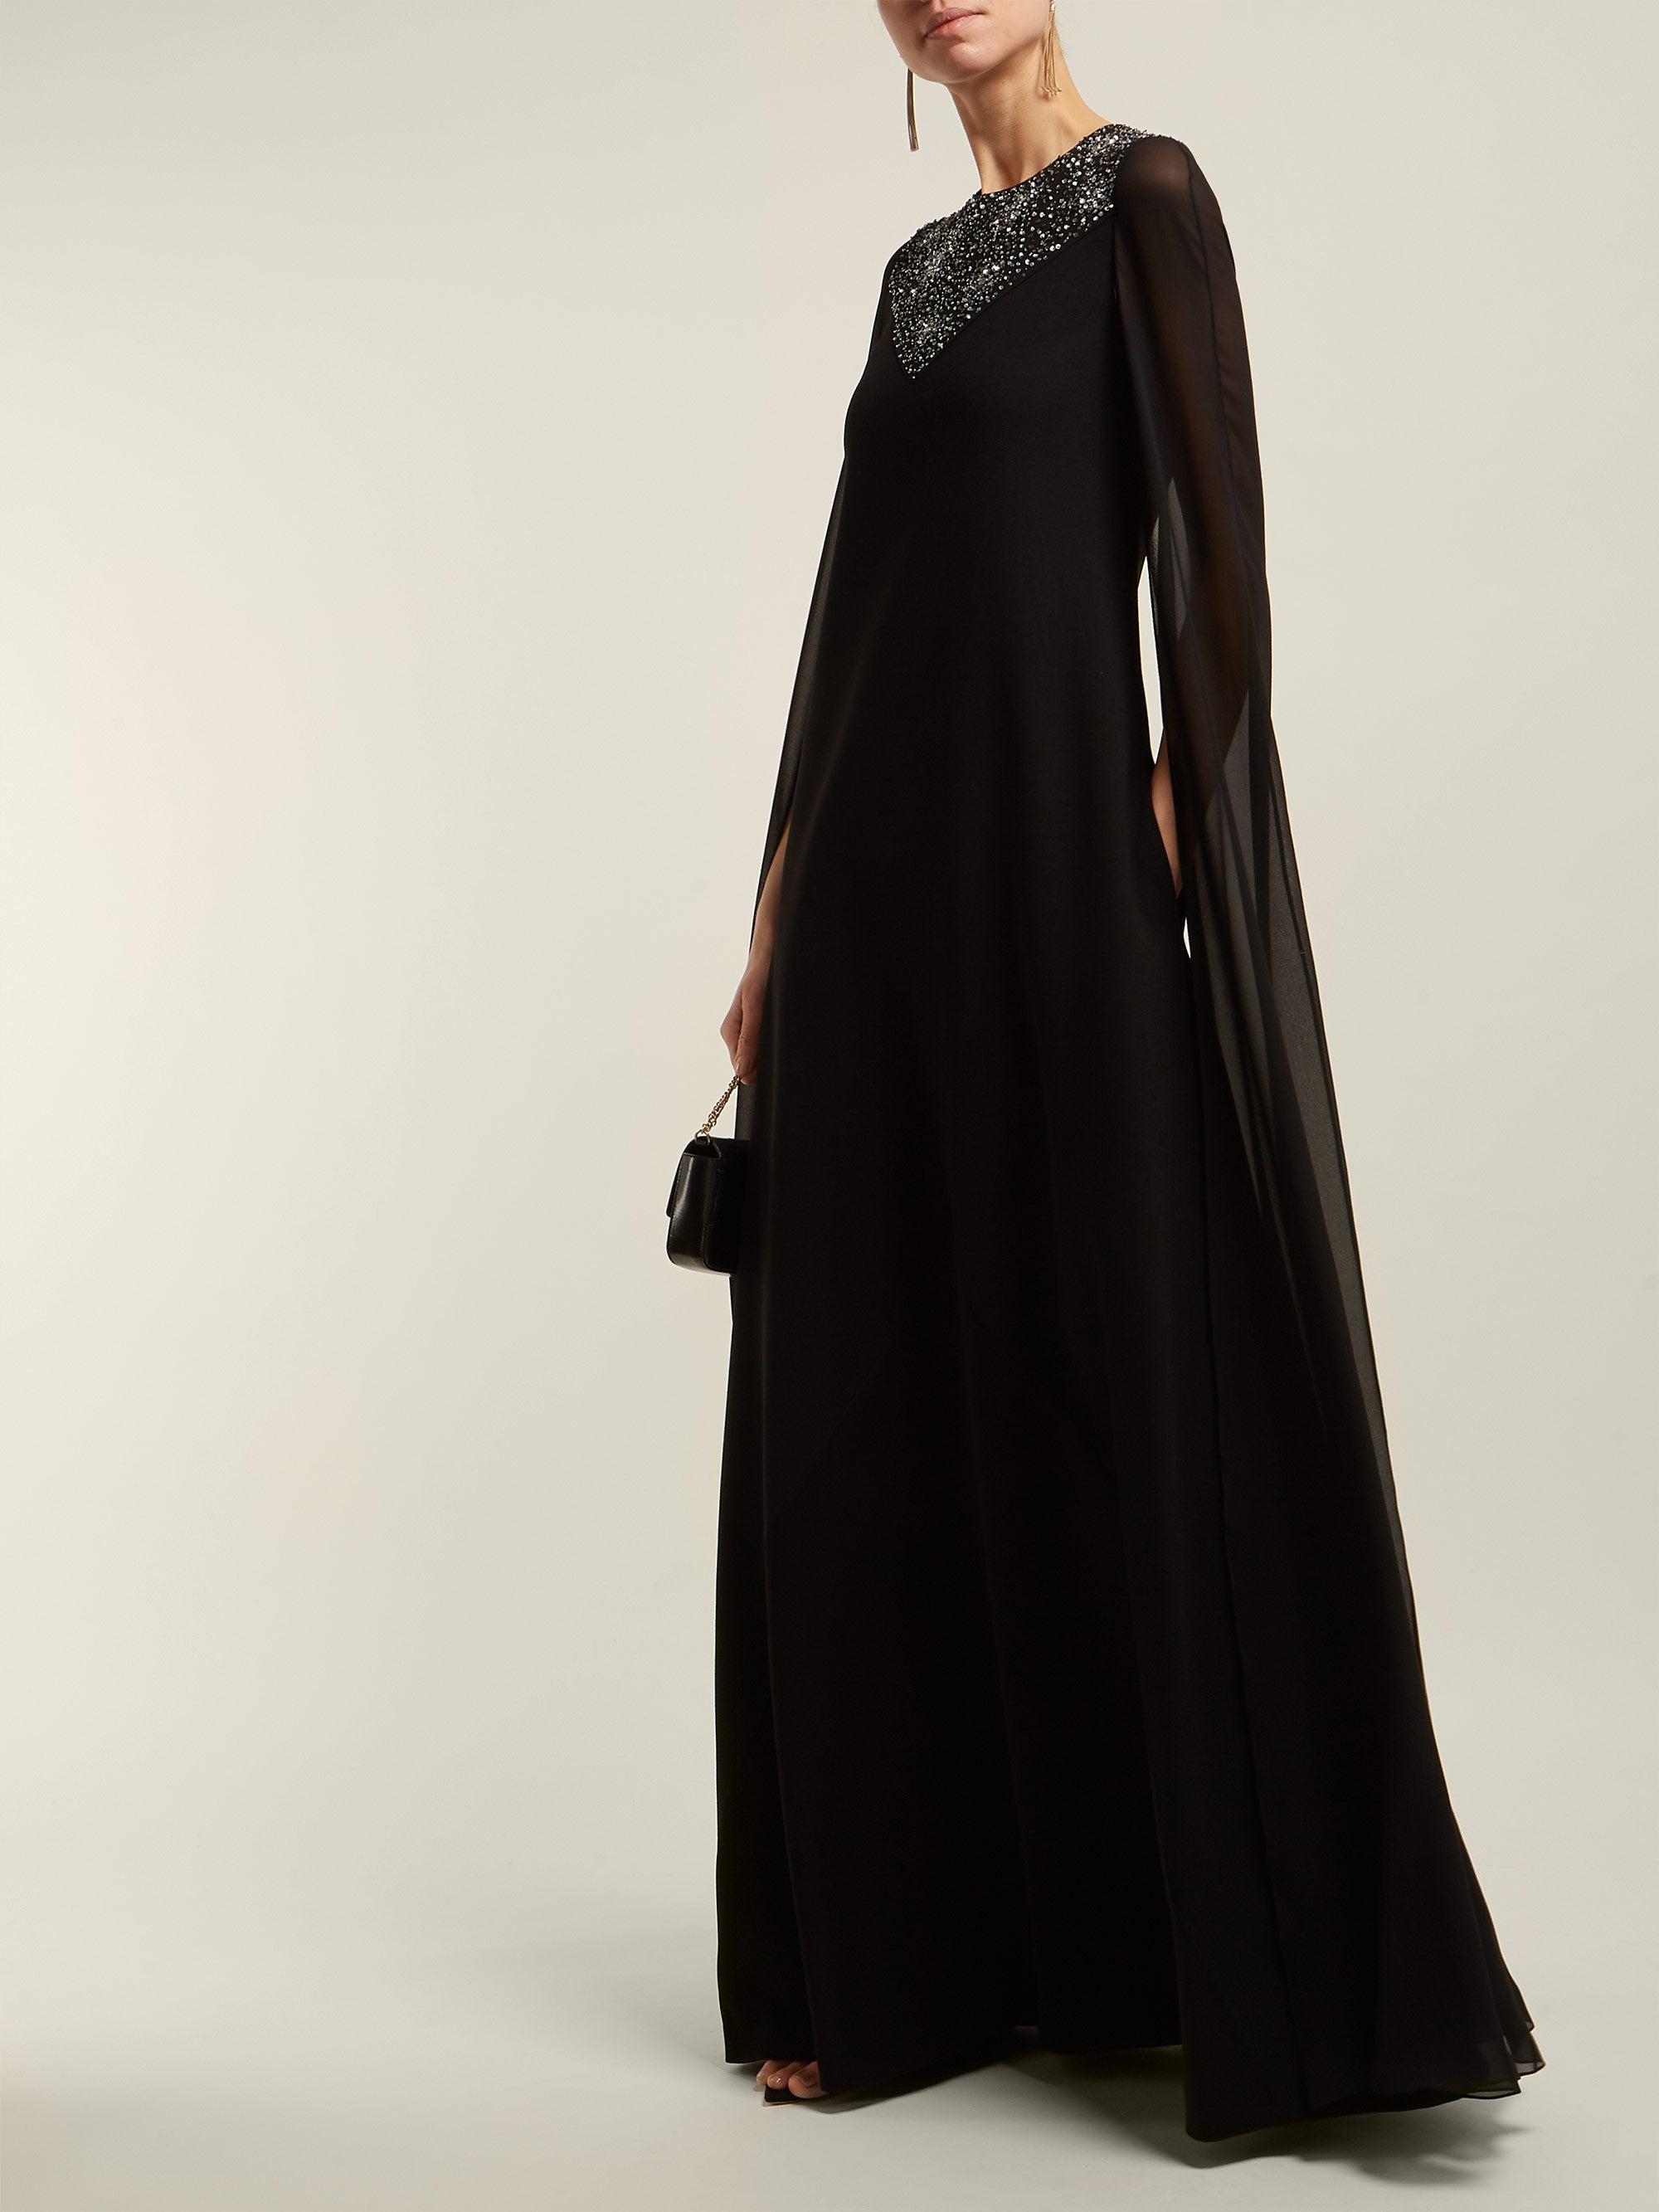 Givenchy Crystal-embellished Wool And Silk-chiffon Gown in Black | Lyst